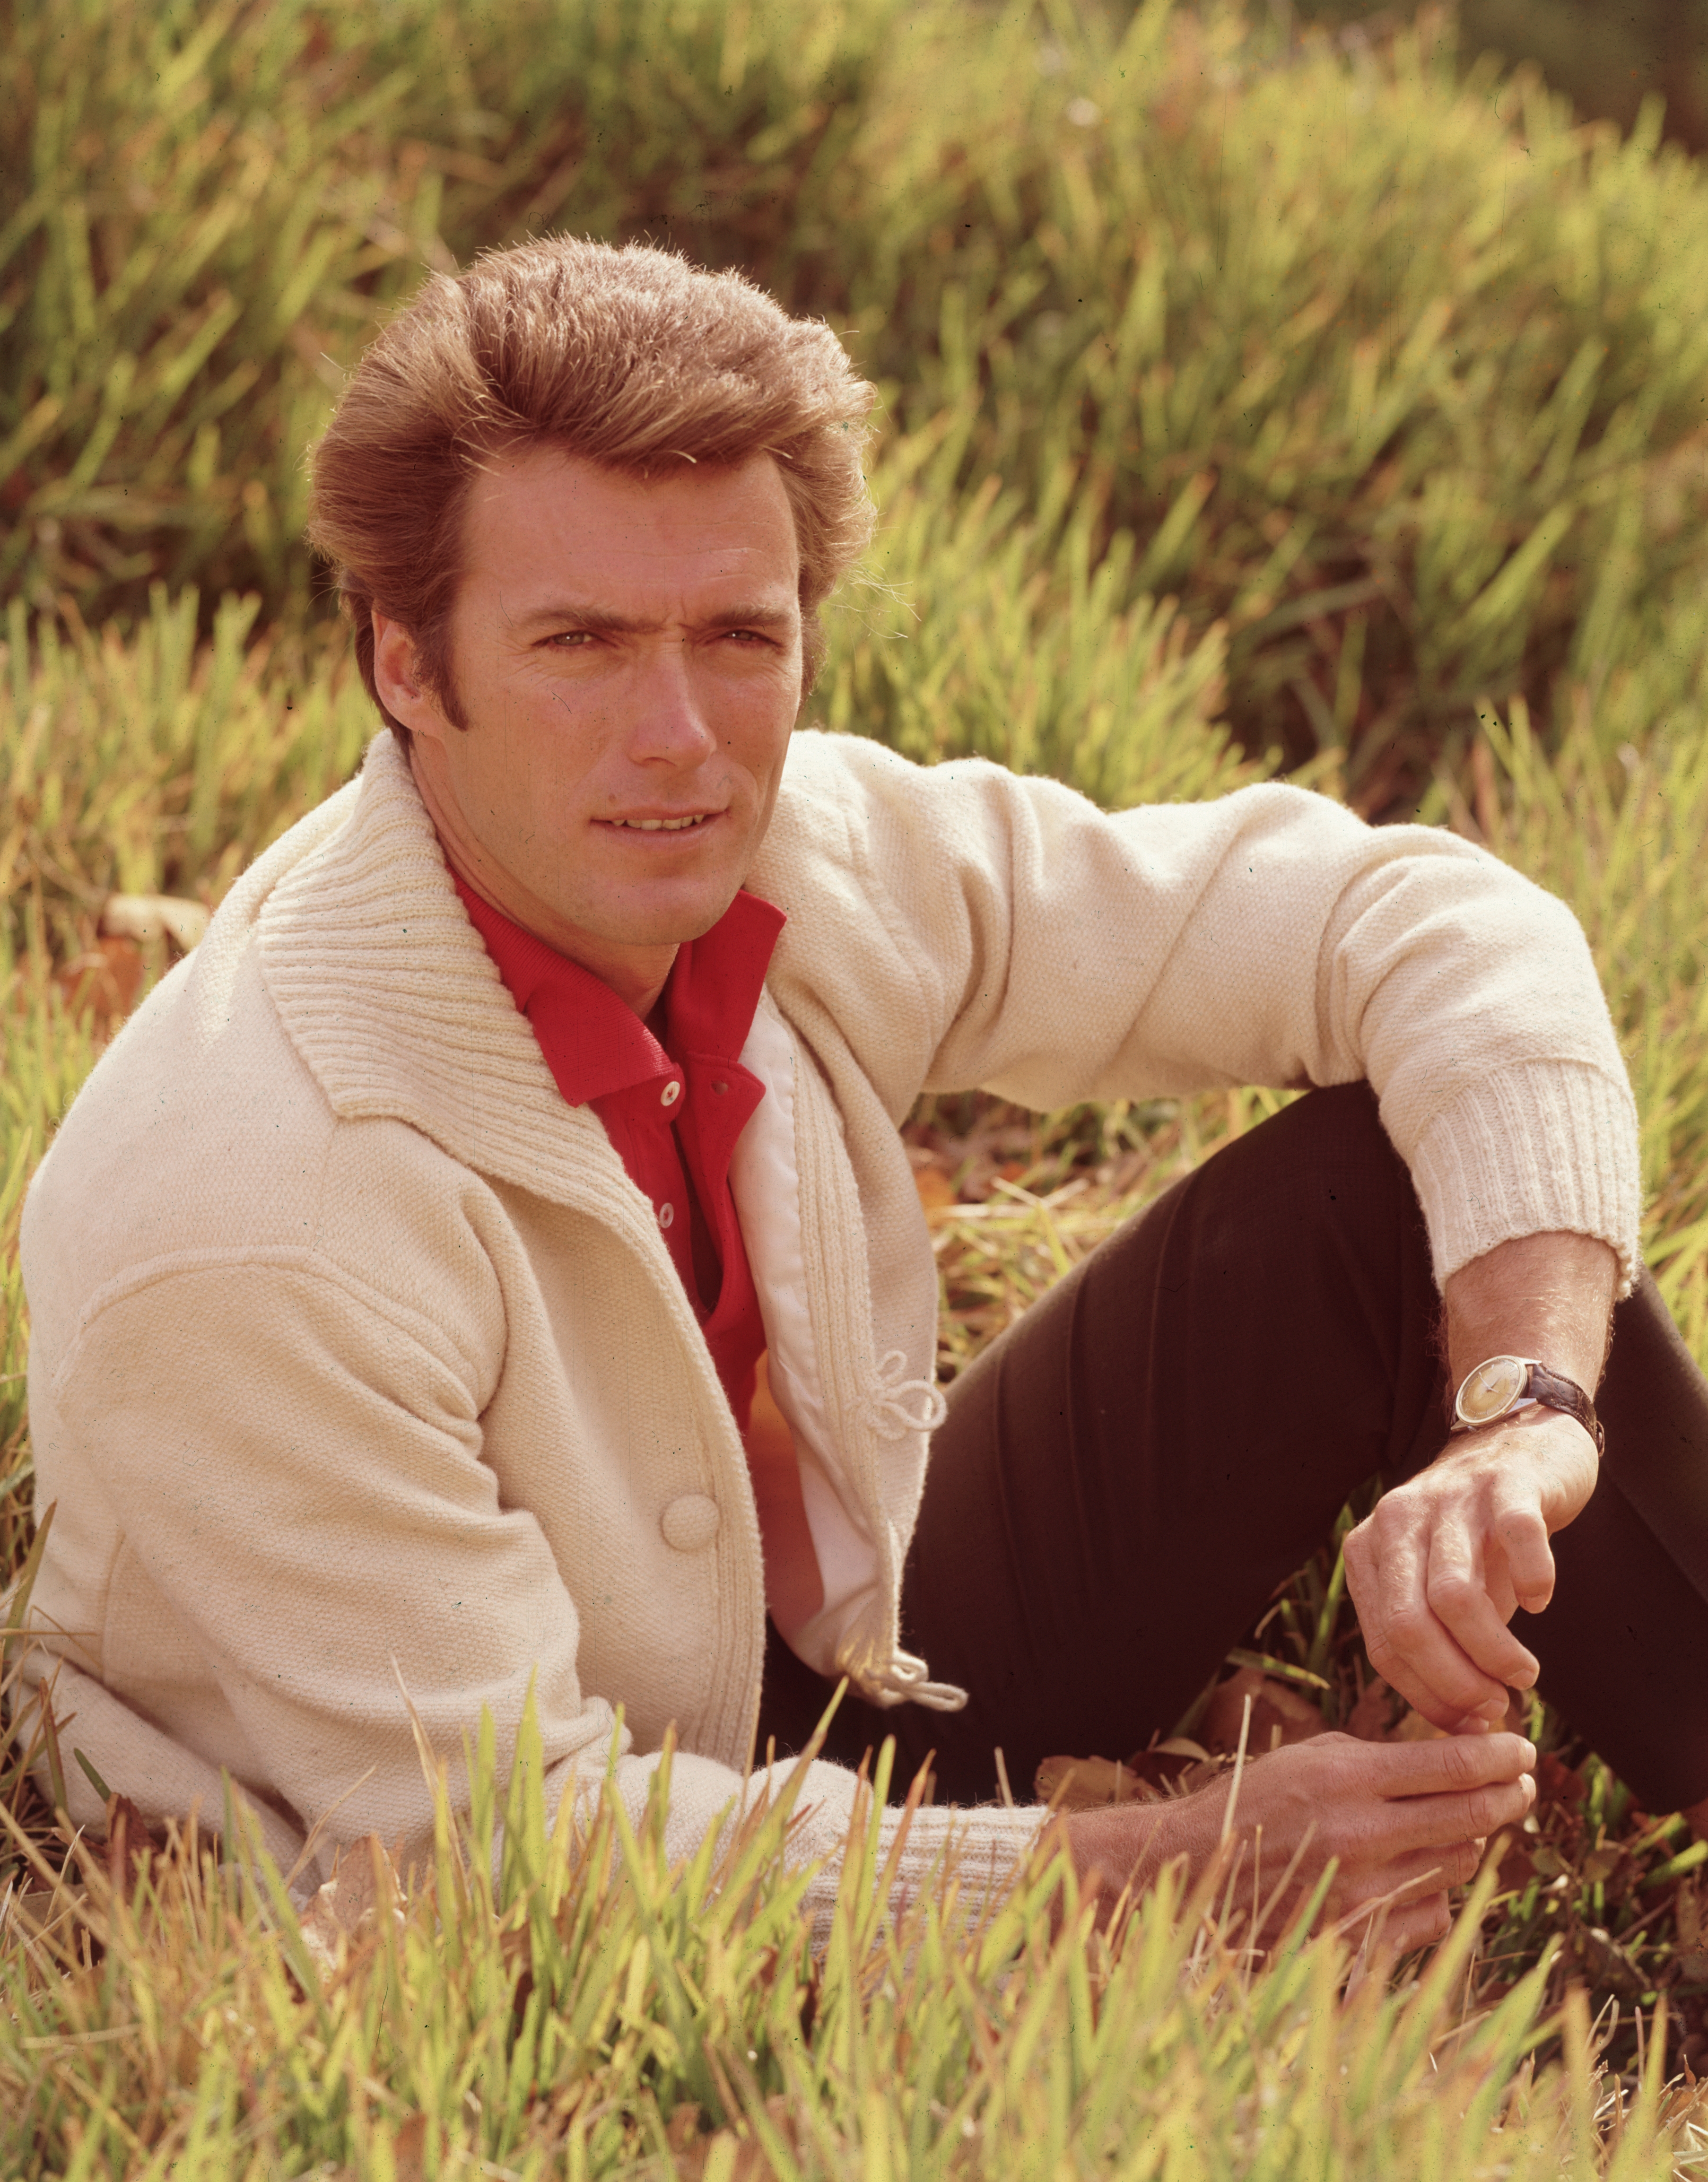 Clint Eastwood circa 1965 | Source: Getty Images